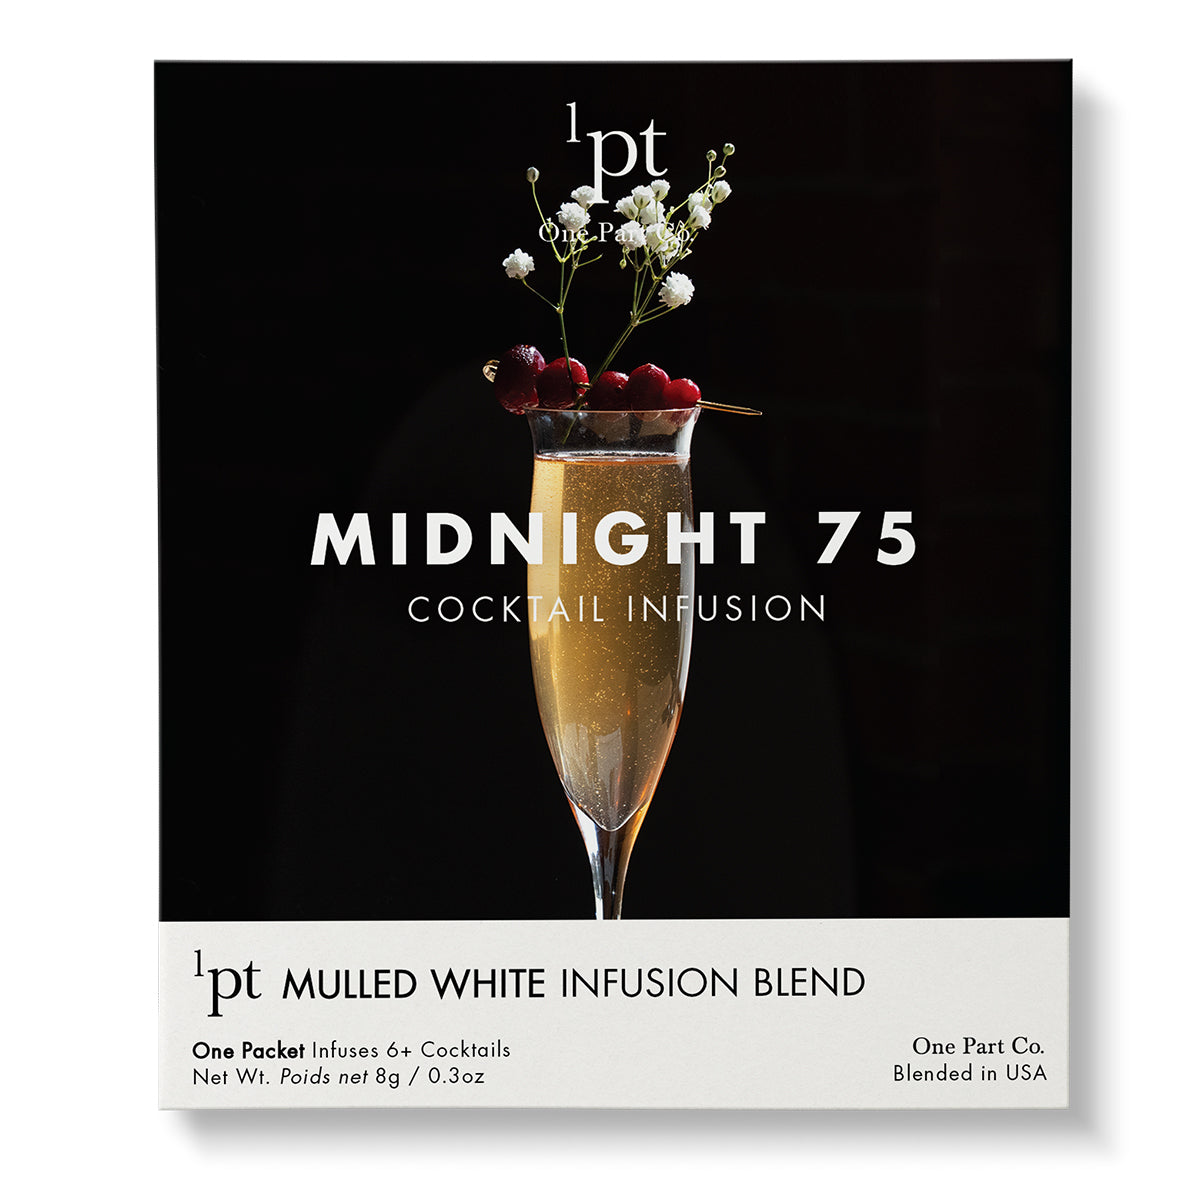 Pack 75 | Infusion 1pt Midnight Cocktail